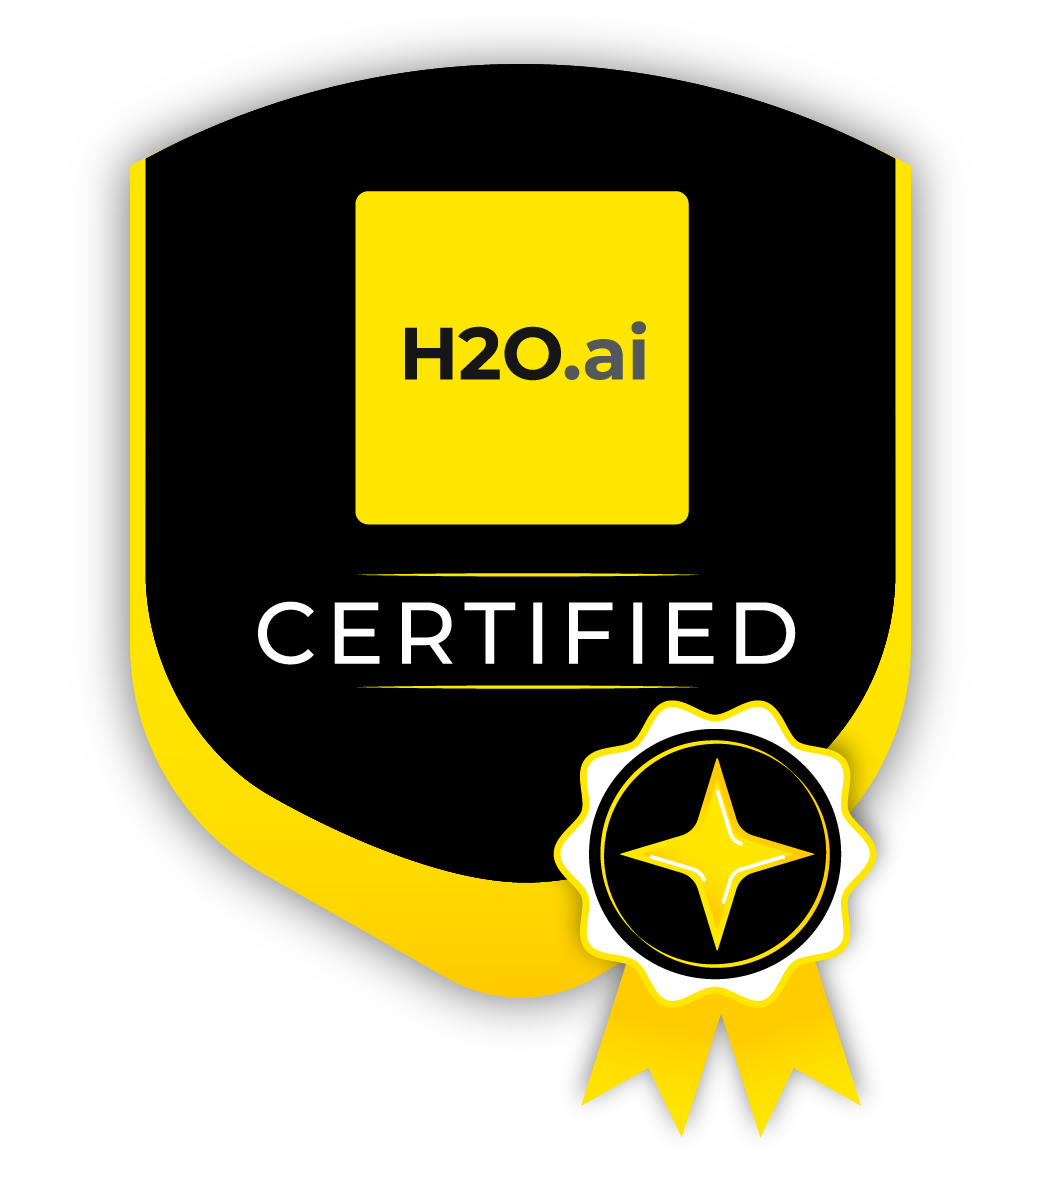 H2O Certified badge with star ribbon in black and yellow